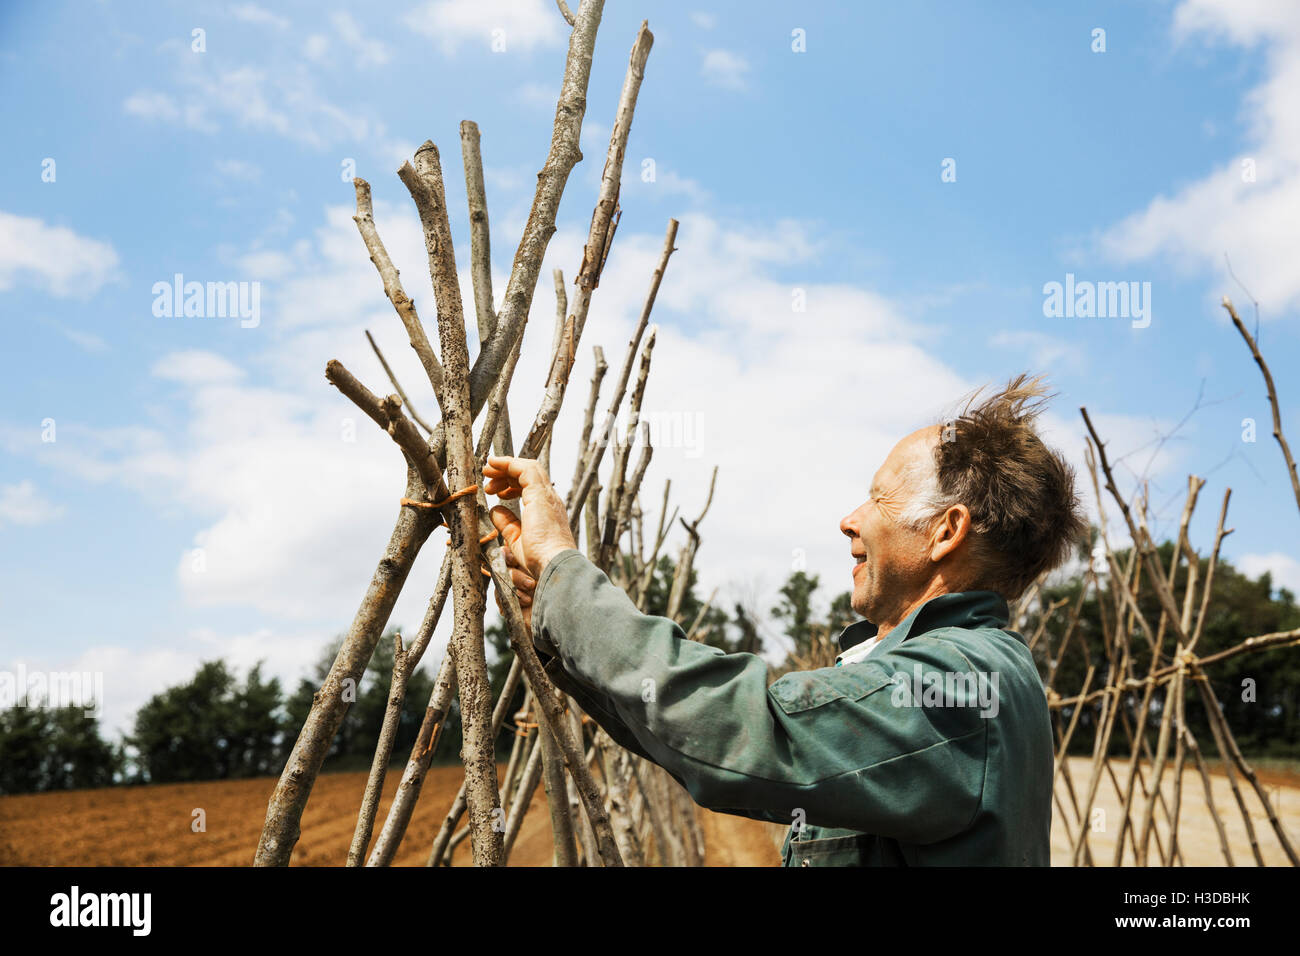 A man tying in poles in a line of bean pole supports. Stock Photo